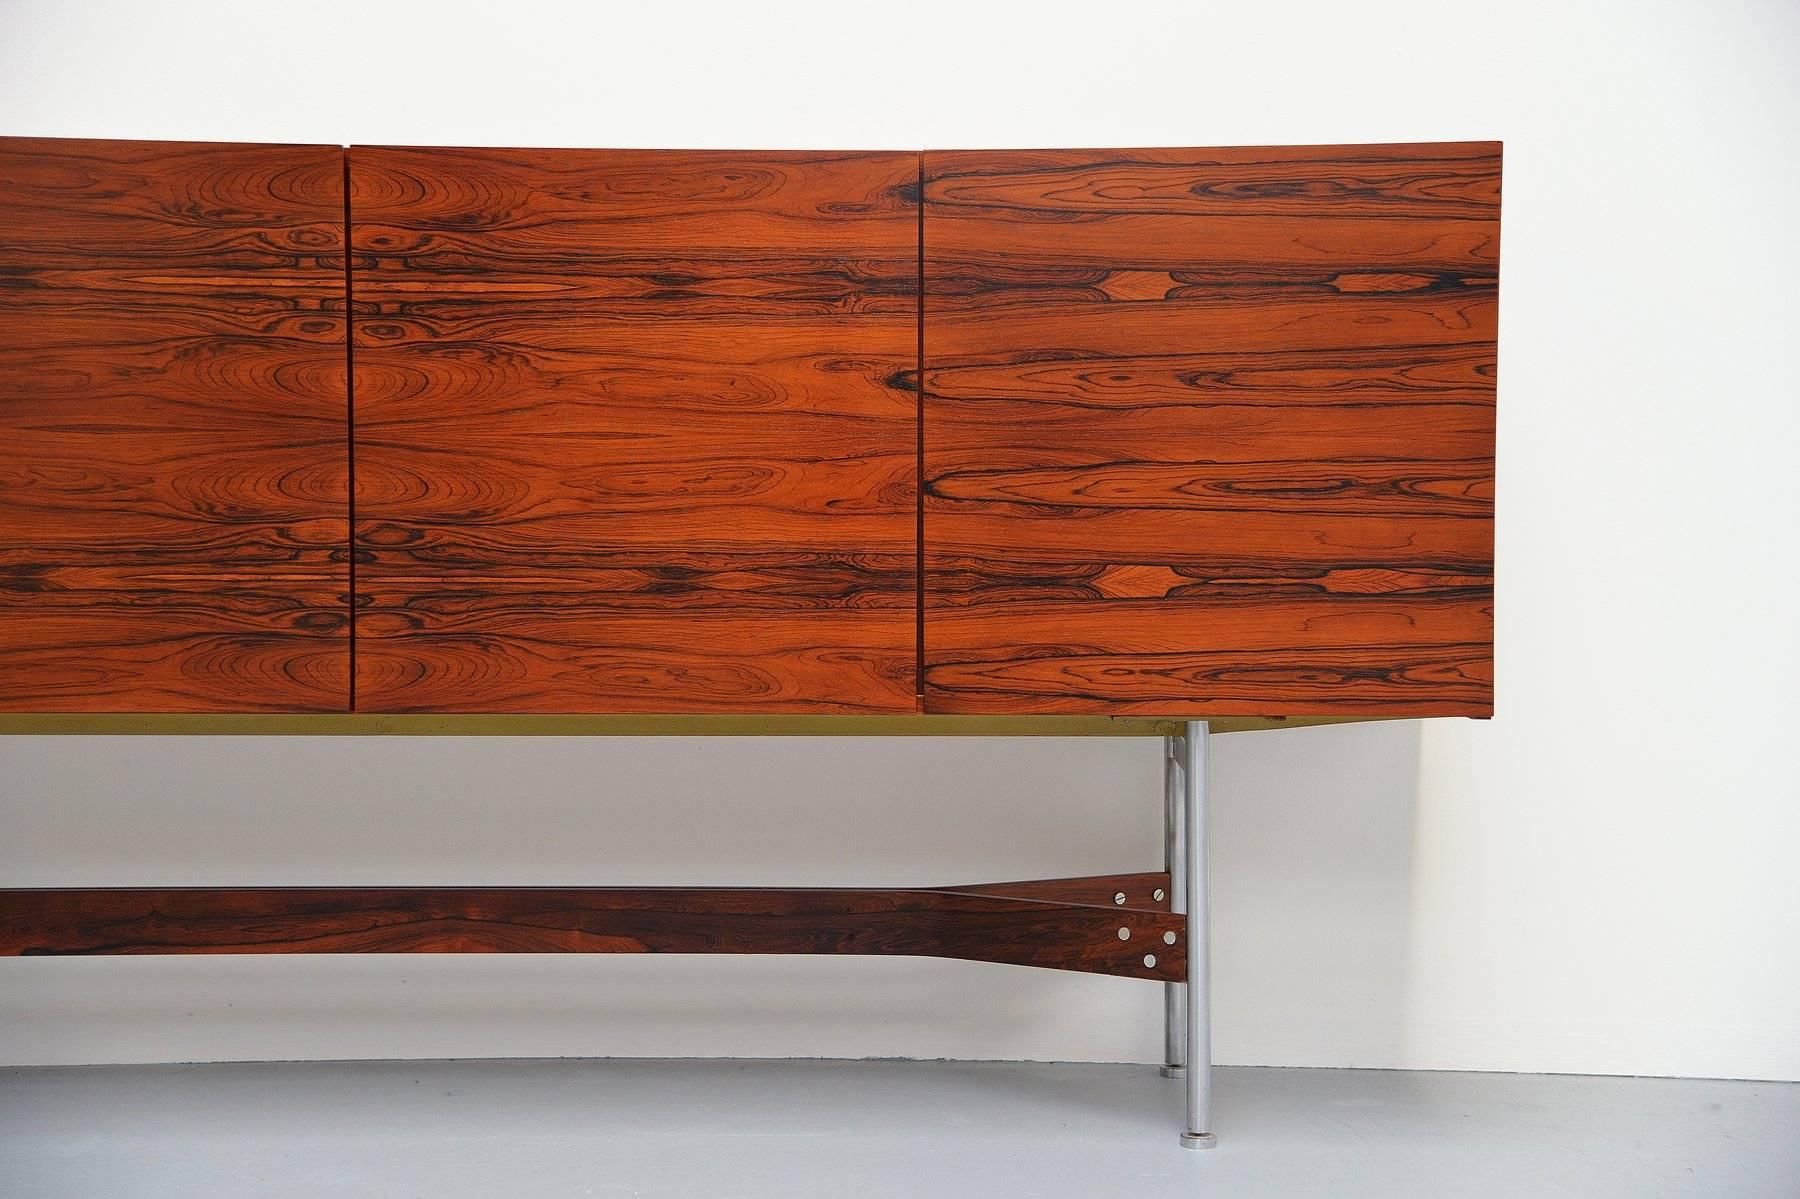 Extraordinary high sideboard designed by Rudolf Glatzel produced by Fristho Franeker, Holland, 1962. This sideboard is from the G-series and was model GLR-230. It has an amazing rosewood grain and brushed steel tubular frame connected with a ply